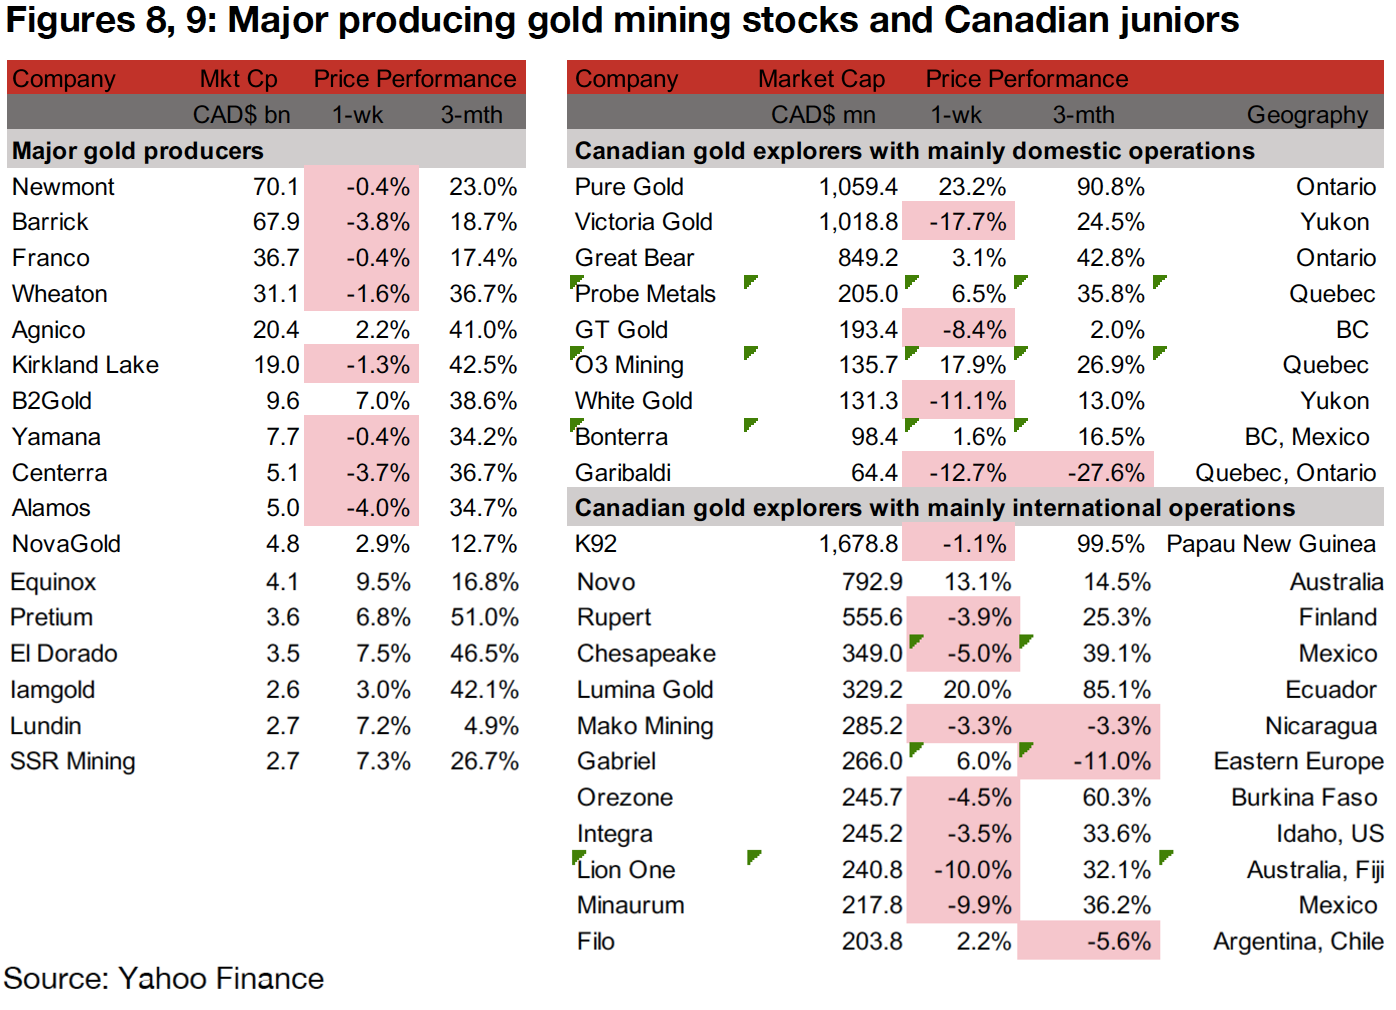 Canadian gold juniors operating domestically mixed